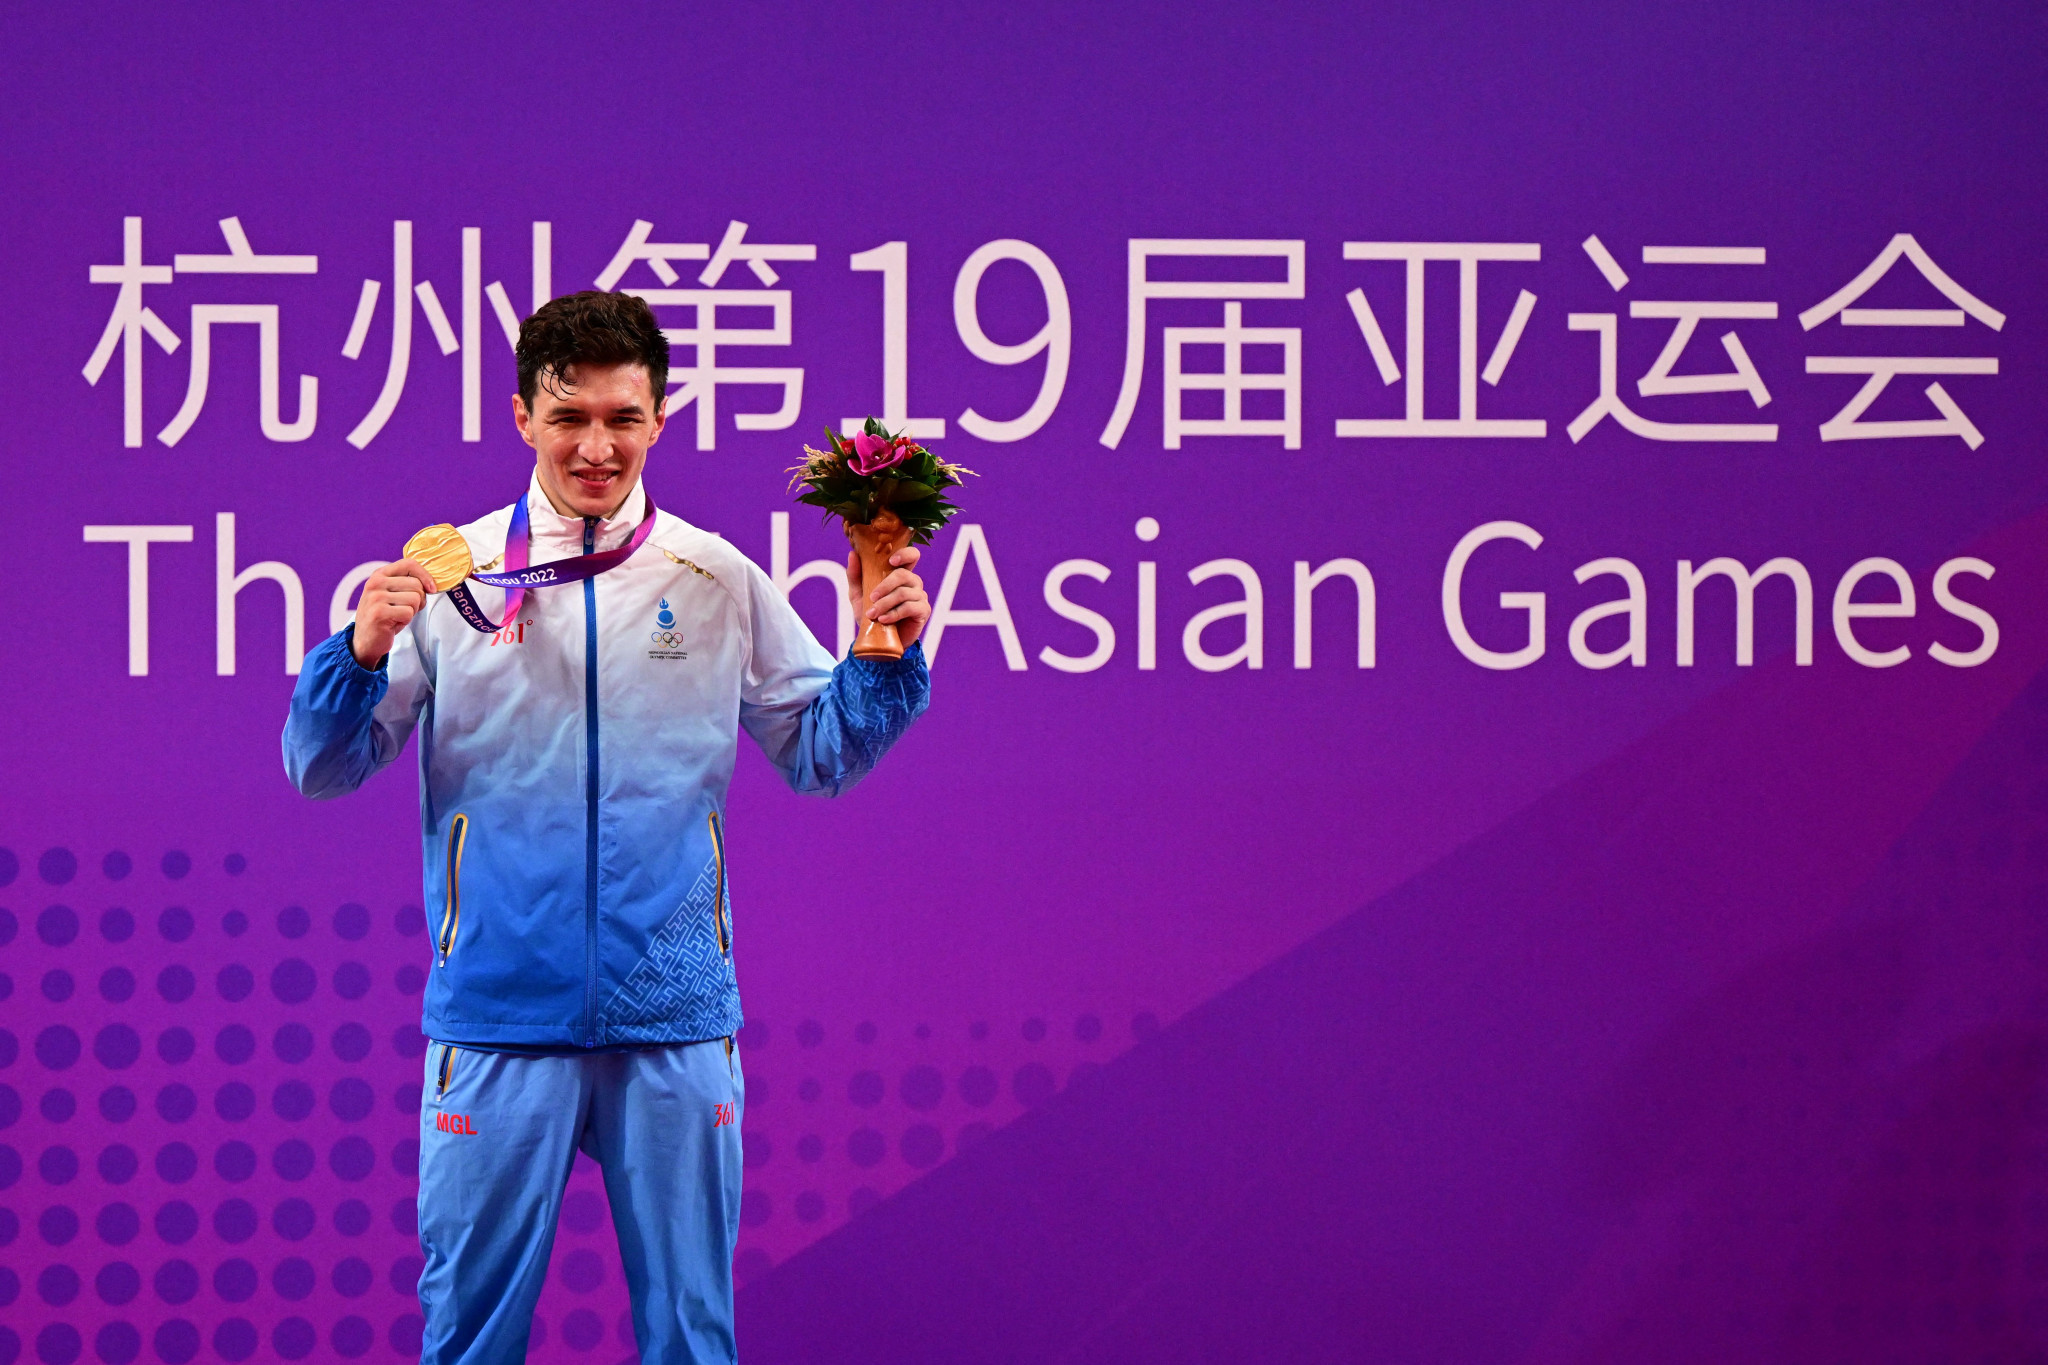 Two gold medallists announced among Hangzhou 2022 drug positives